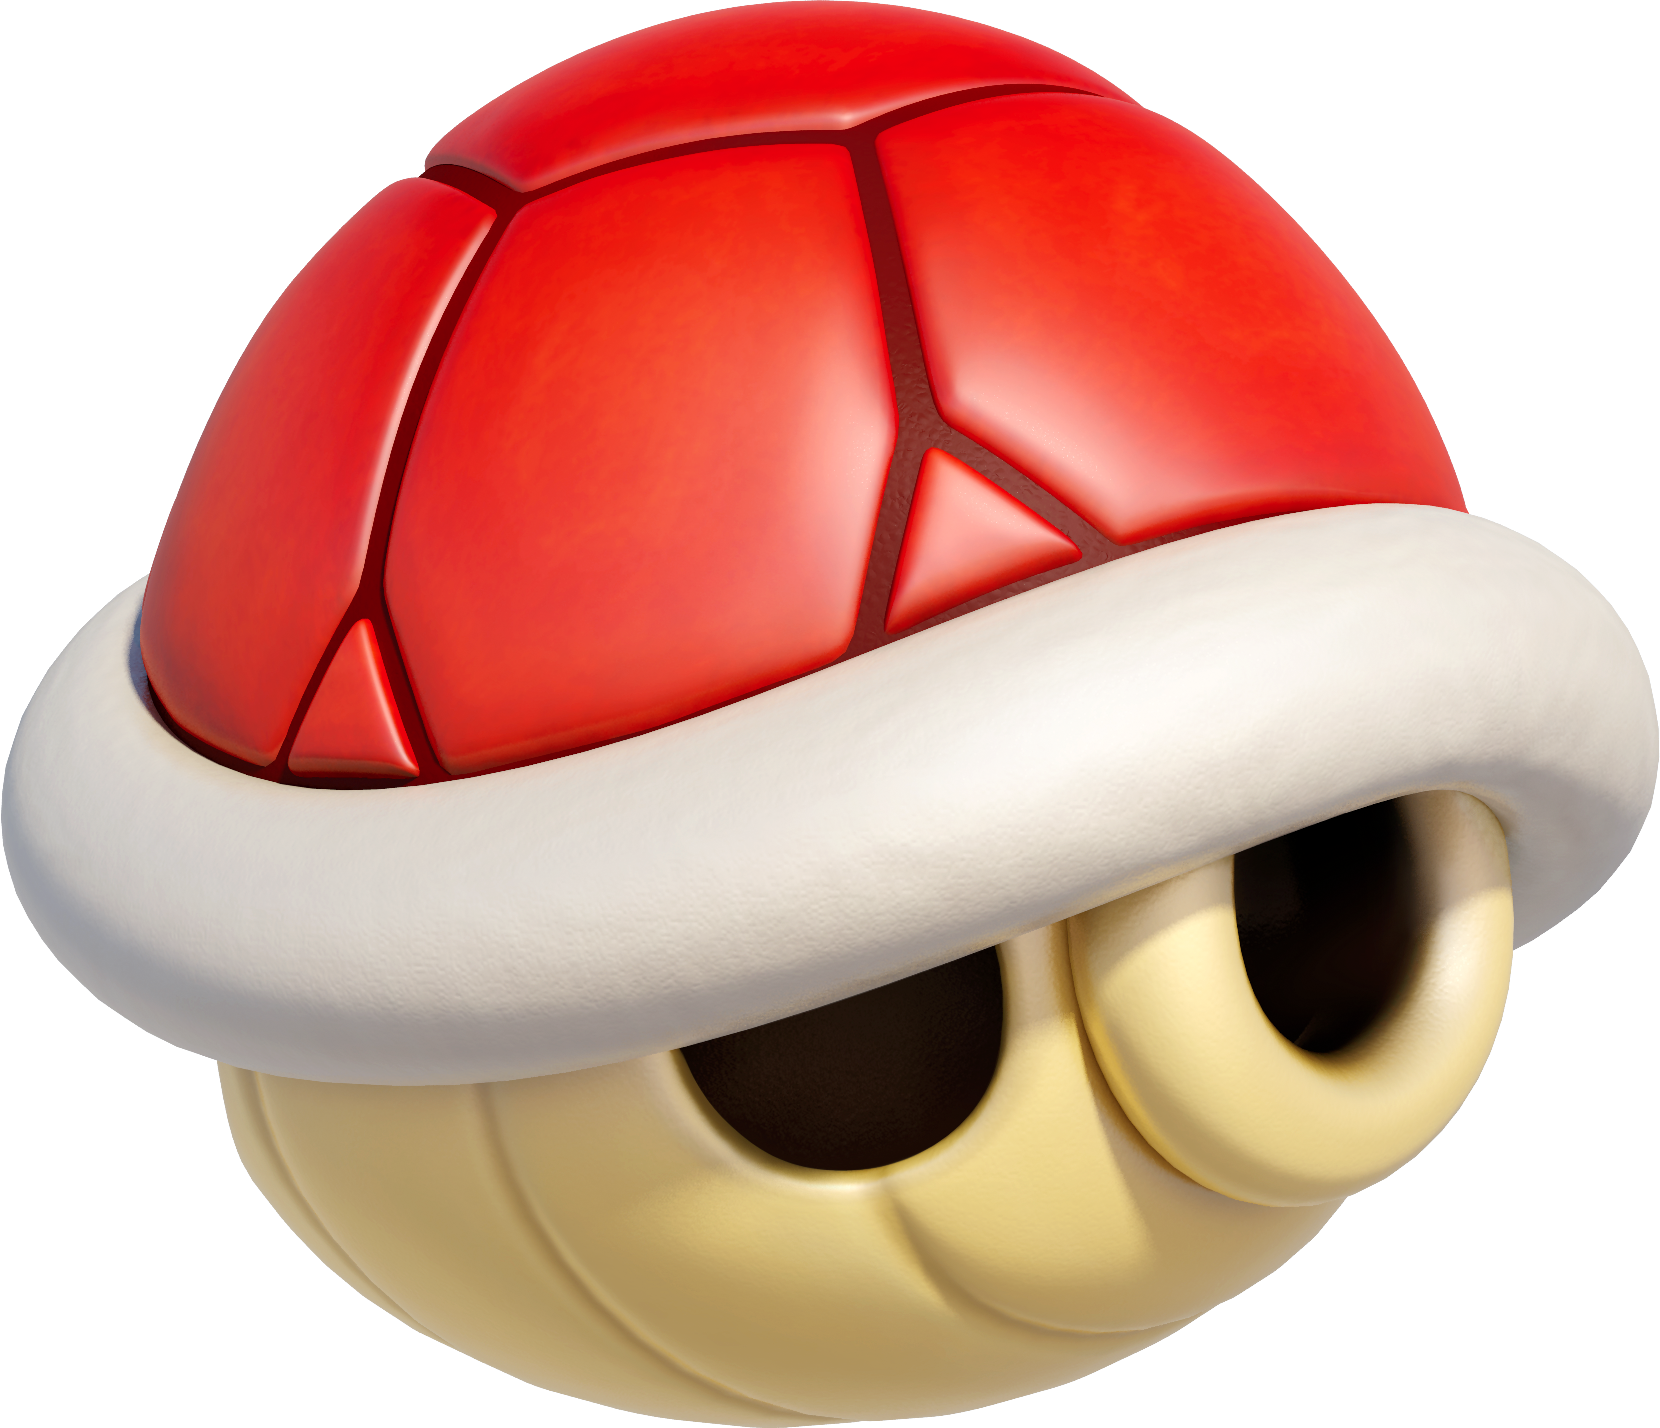 Red Shell (Mario Kart 8).png - Shell, Transparent background PNG HD thumbnail